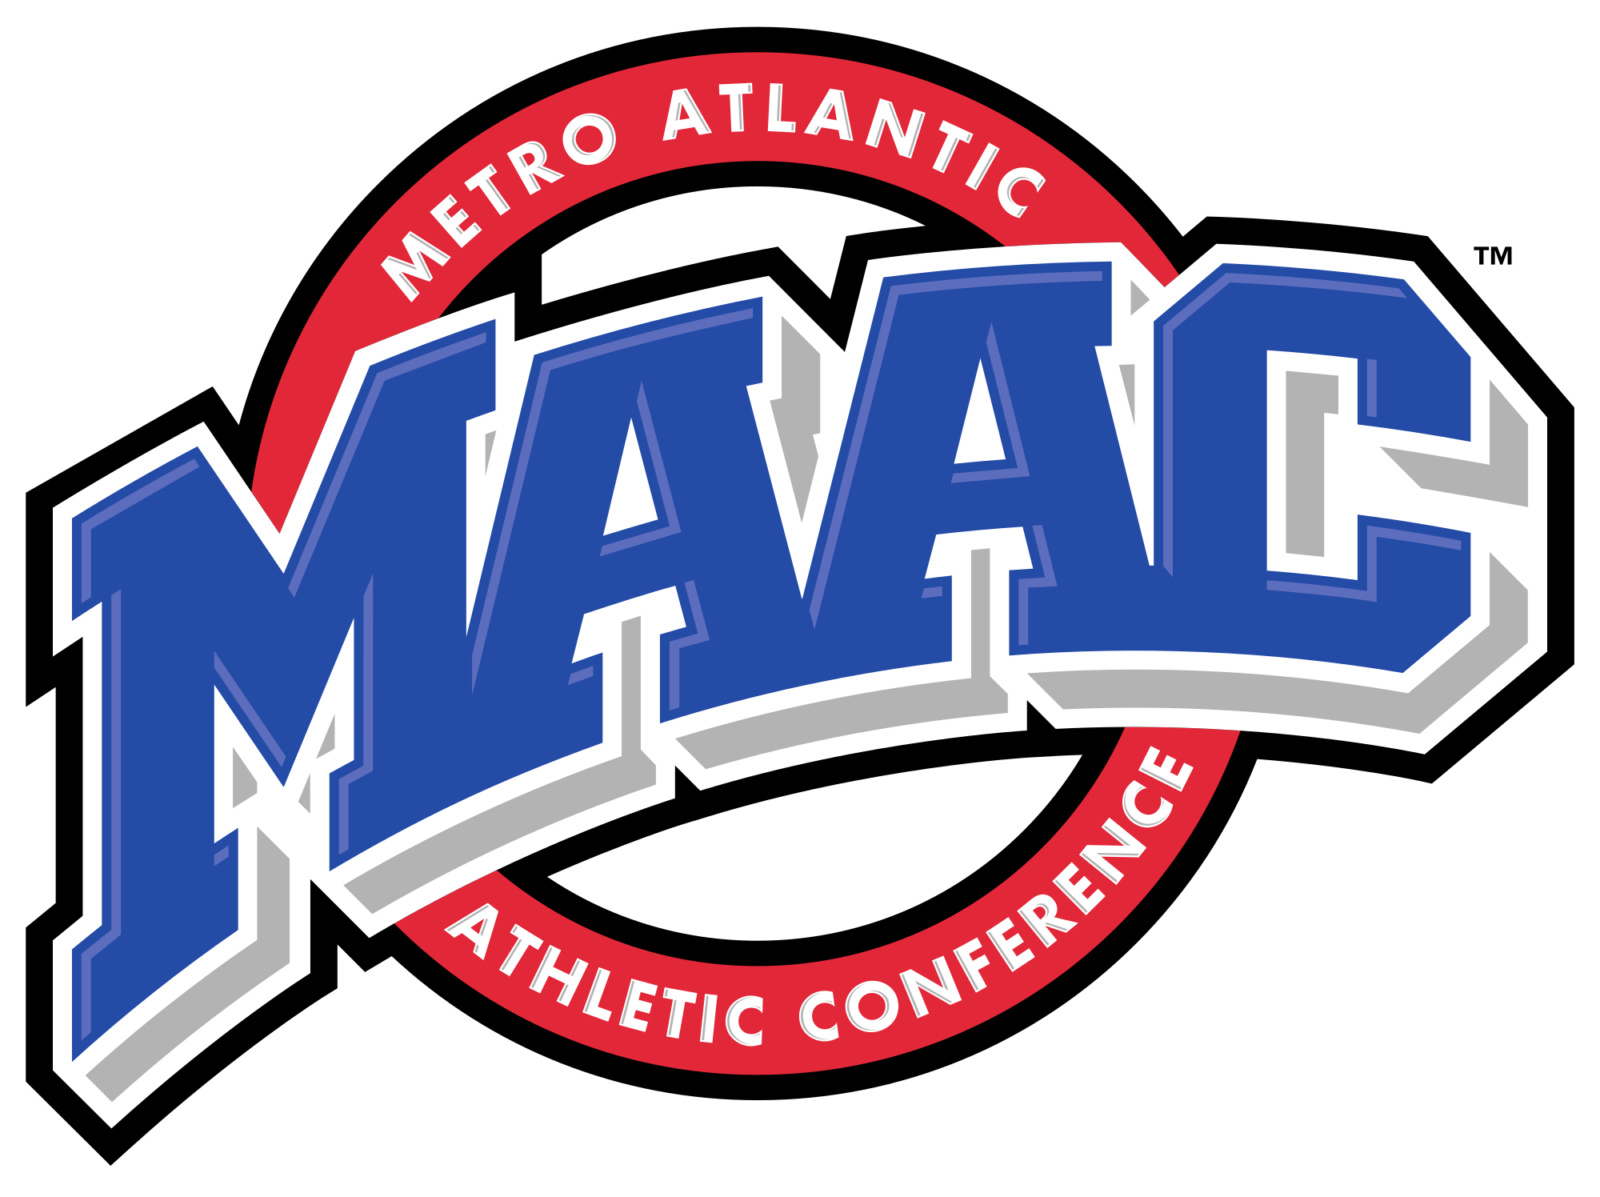 Inspiration Middle Atlantic Conference Logo Facts, Meaning, History